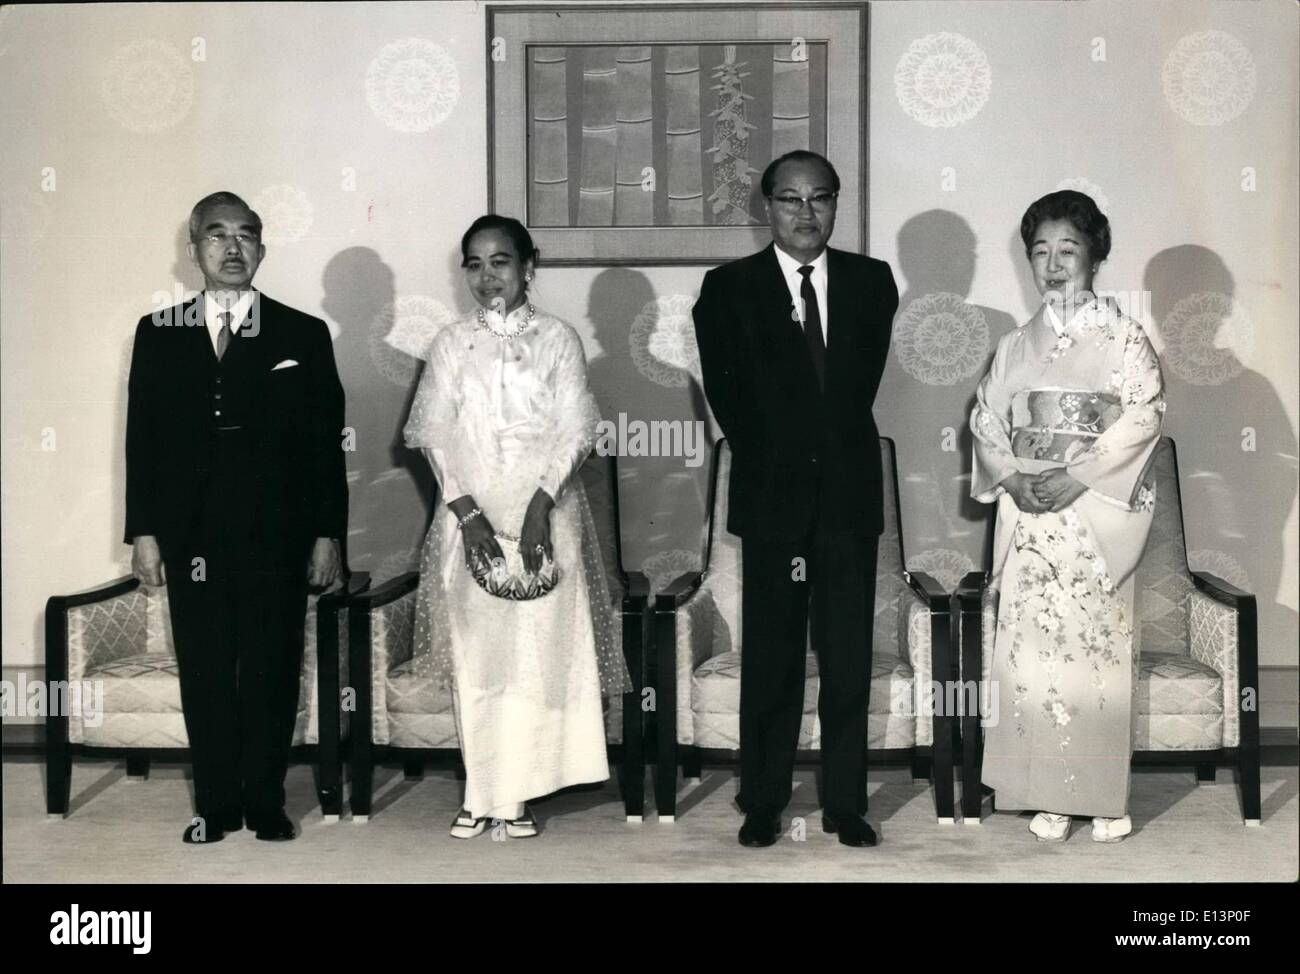 Mar. 22, 2012 - General Ne Win received by Emperor: Gen. Ne win, chairman of the Burmese Revolutionary council, accompanied by his wife are received by the Emperor and Empress at the Imperial Palace, Tokyo. The Burmese General is visiting Japan as a guest of the Japaneses Government to attend Burma's National Day events at Expo '70. Photo shows (from left to right) Emperor, Madame Ne Win, General Ne Win, and Empress, at the Imperial Palace, Tokyo. Stock Photo